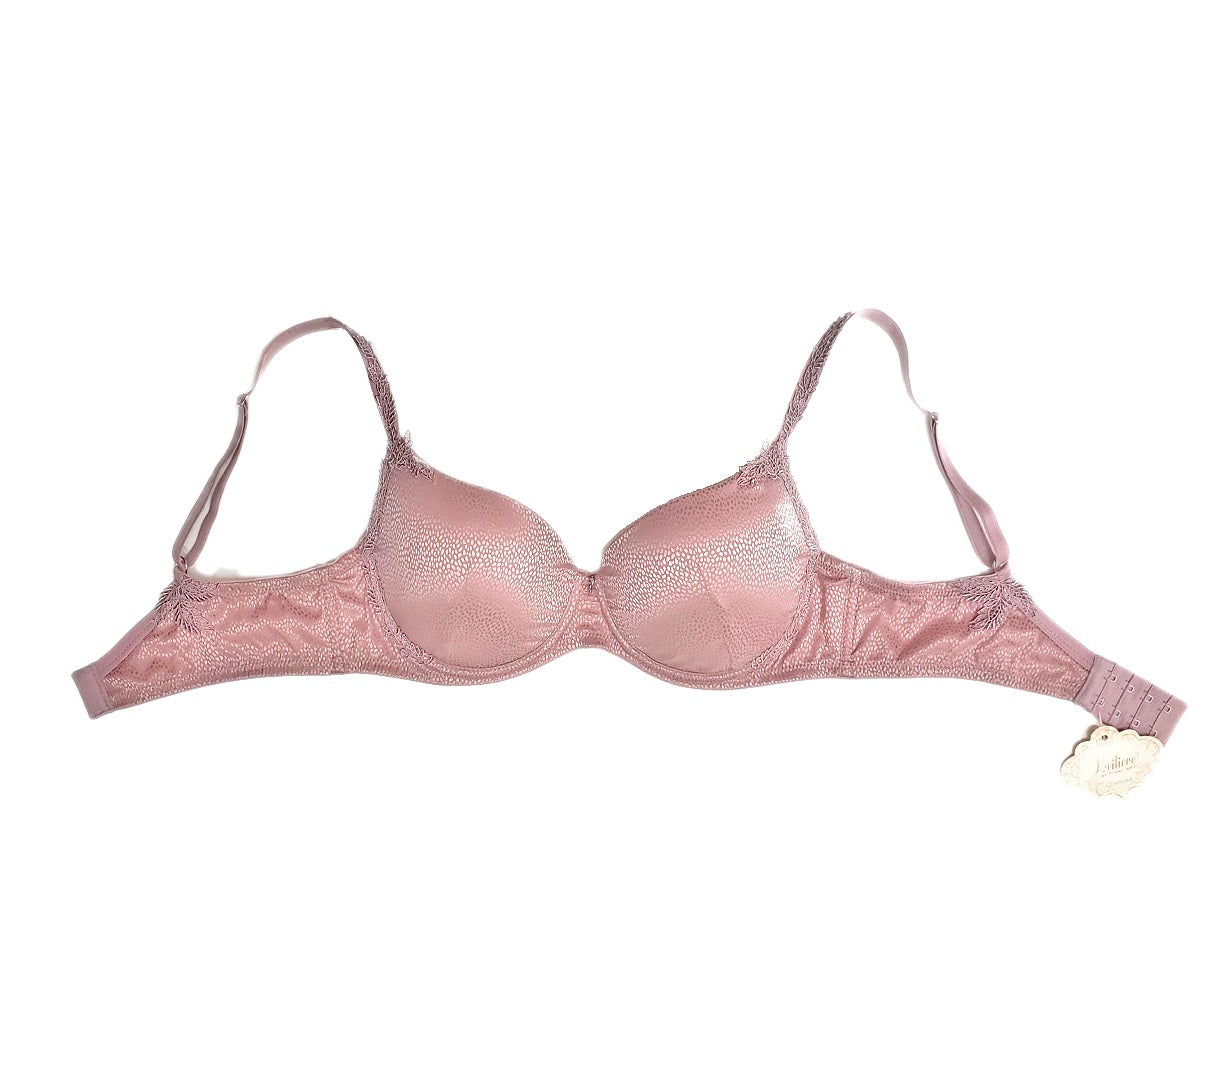 Treat yourself to sophisticated luxury with this Molded Smooth Satiny Cup Bra from Leilieve's KissMe line. 